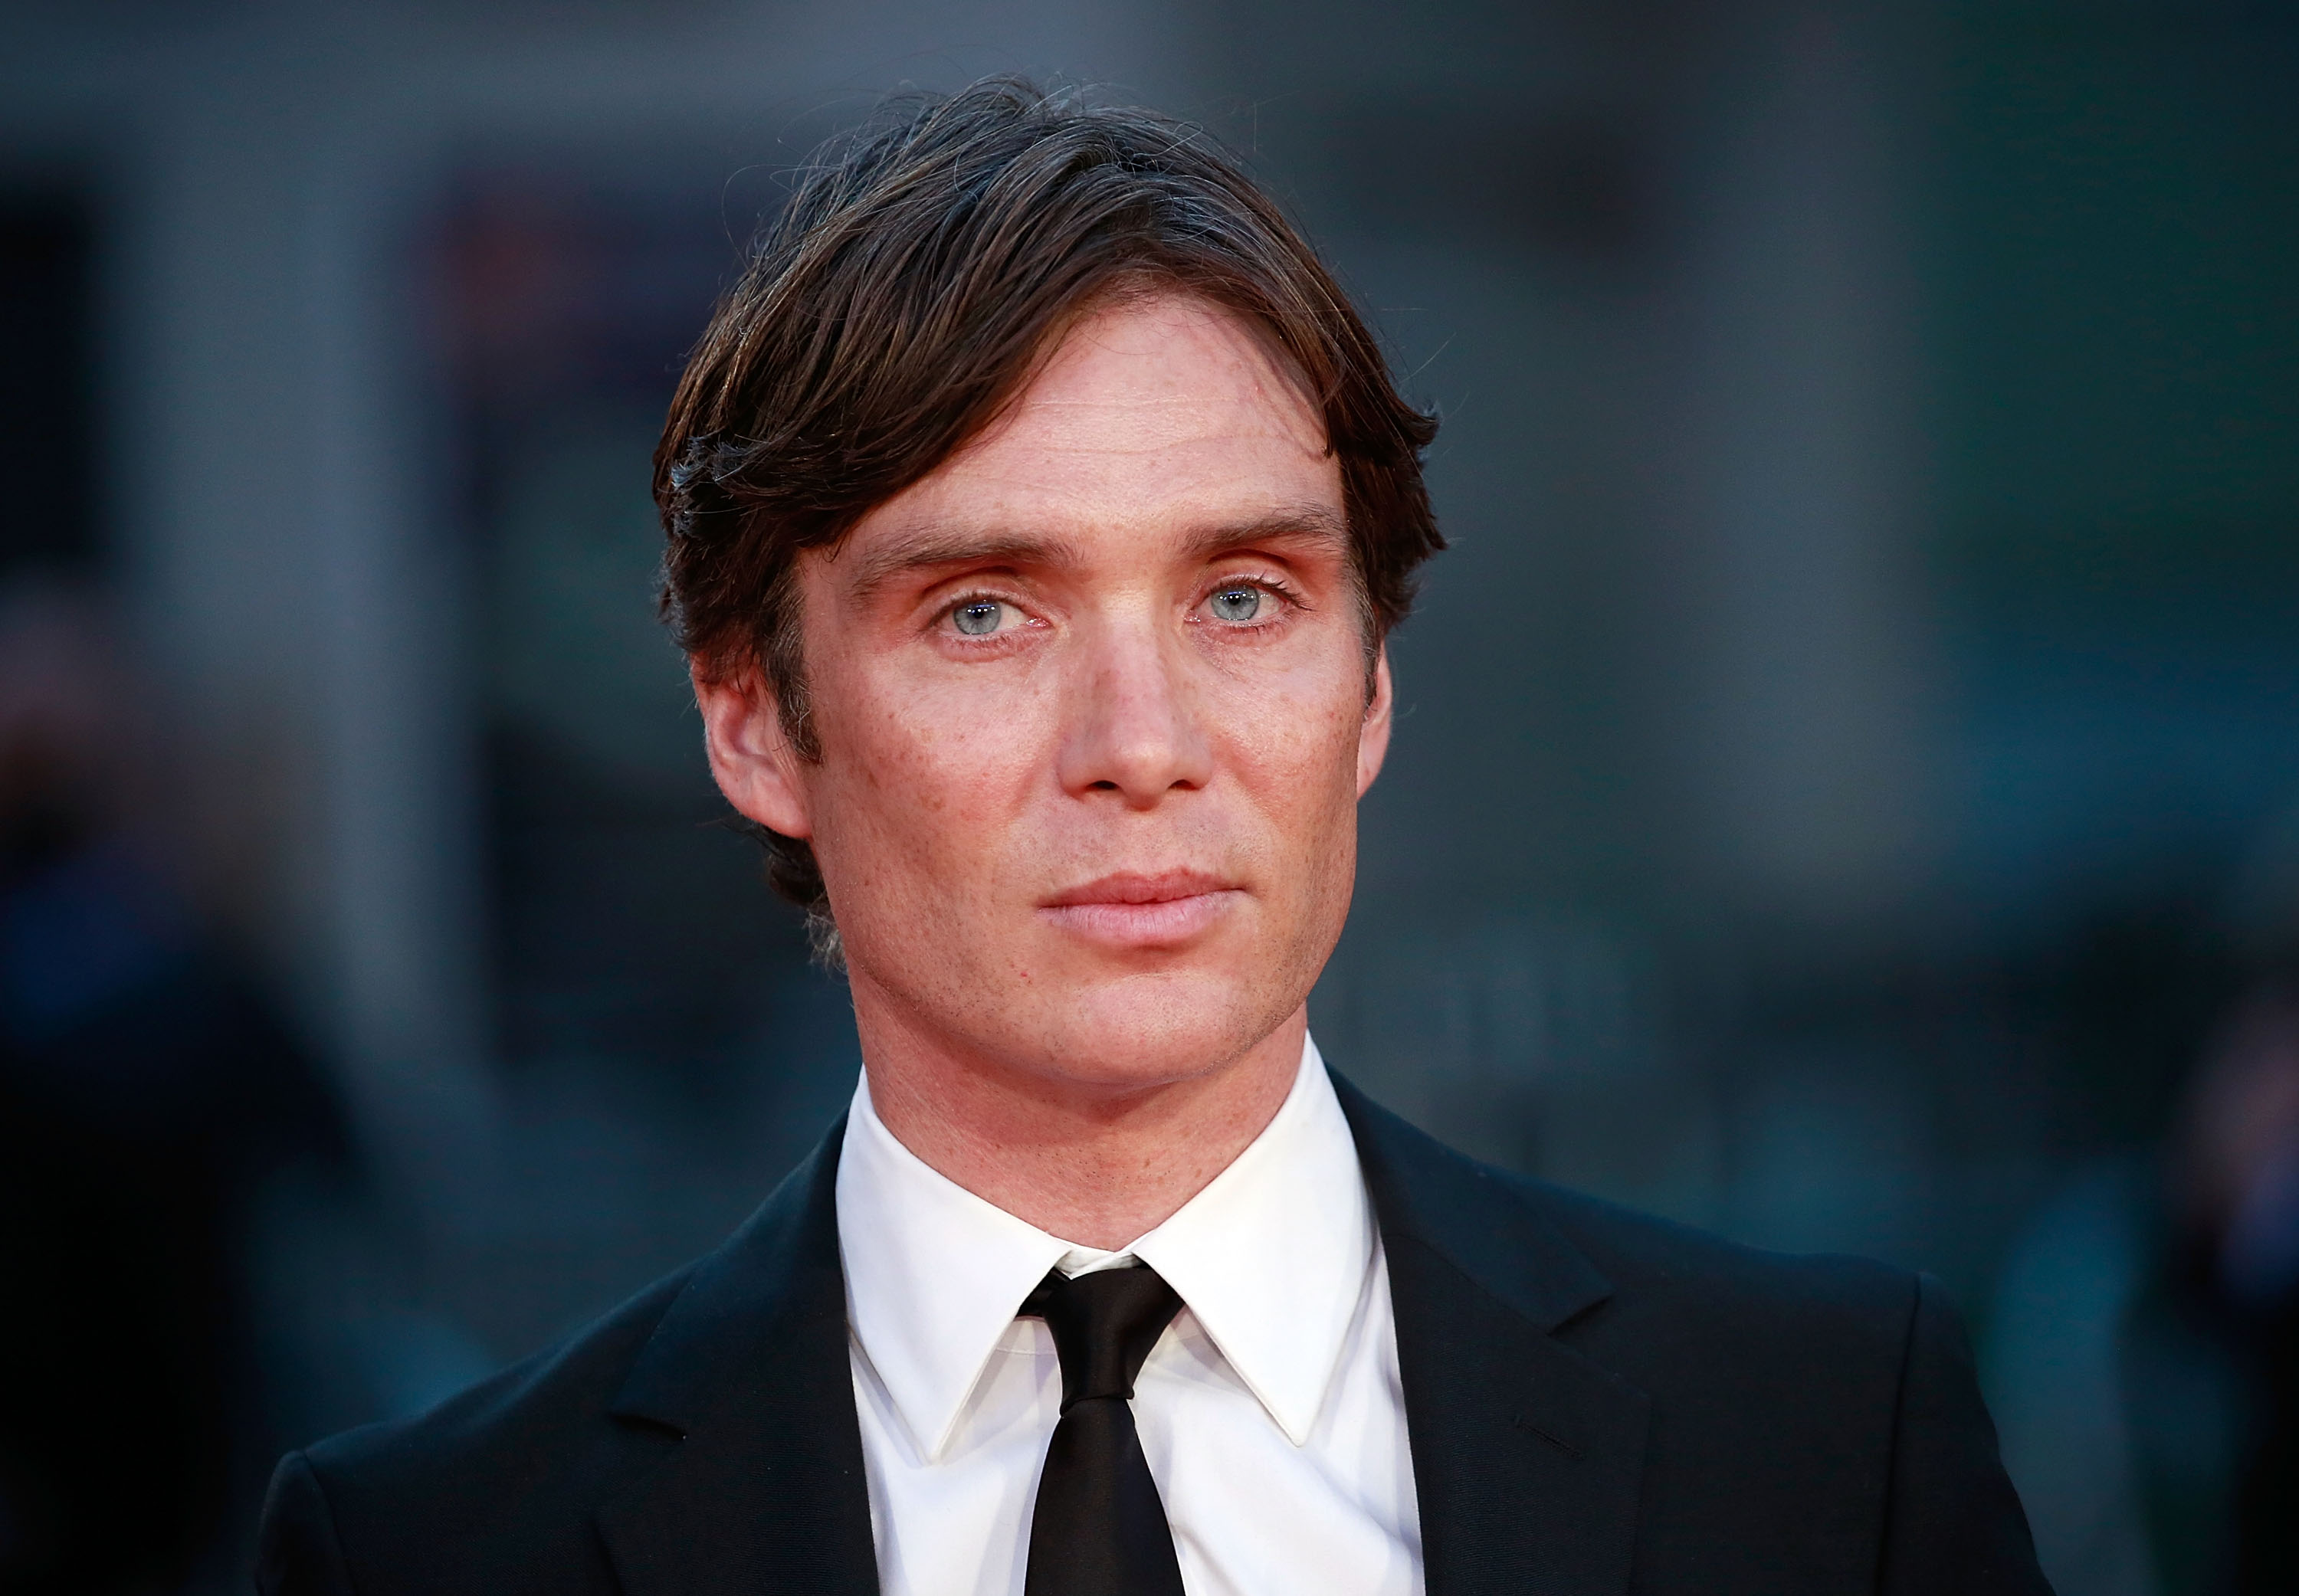 Cillian Murphy attends the 60th BFI London Film Festival on October 16, 2016 in London, England | Source: Getty Images